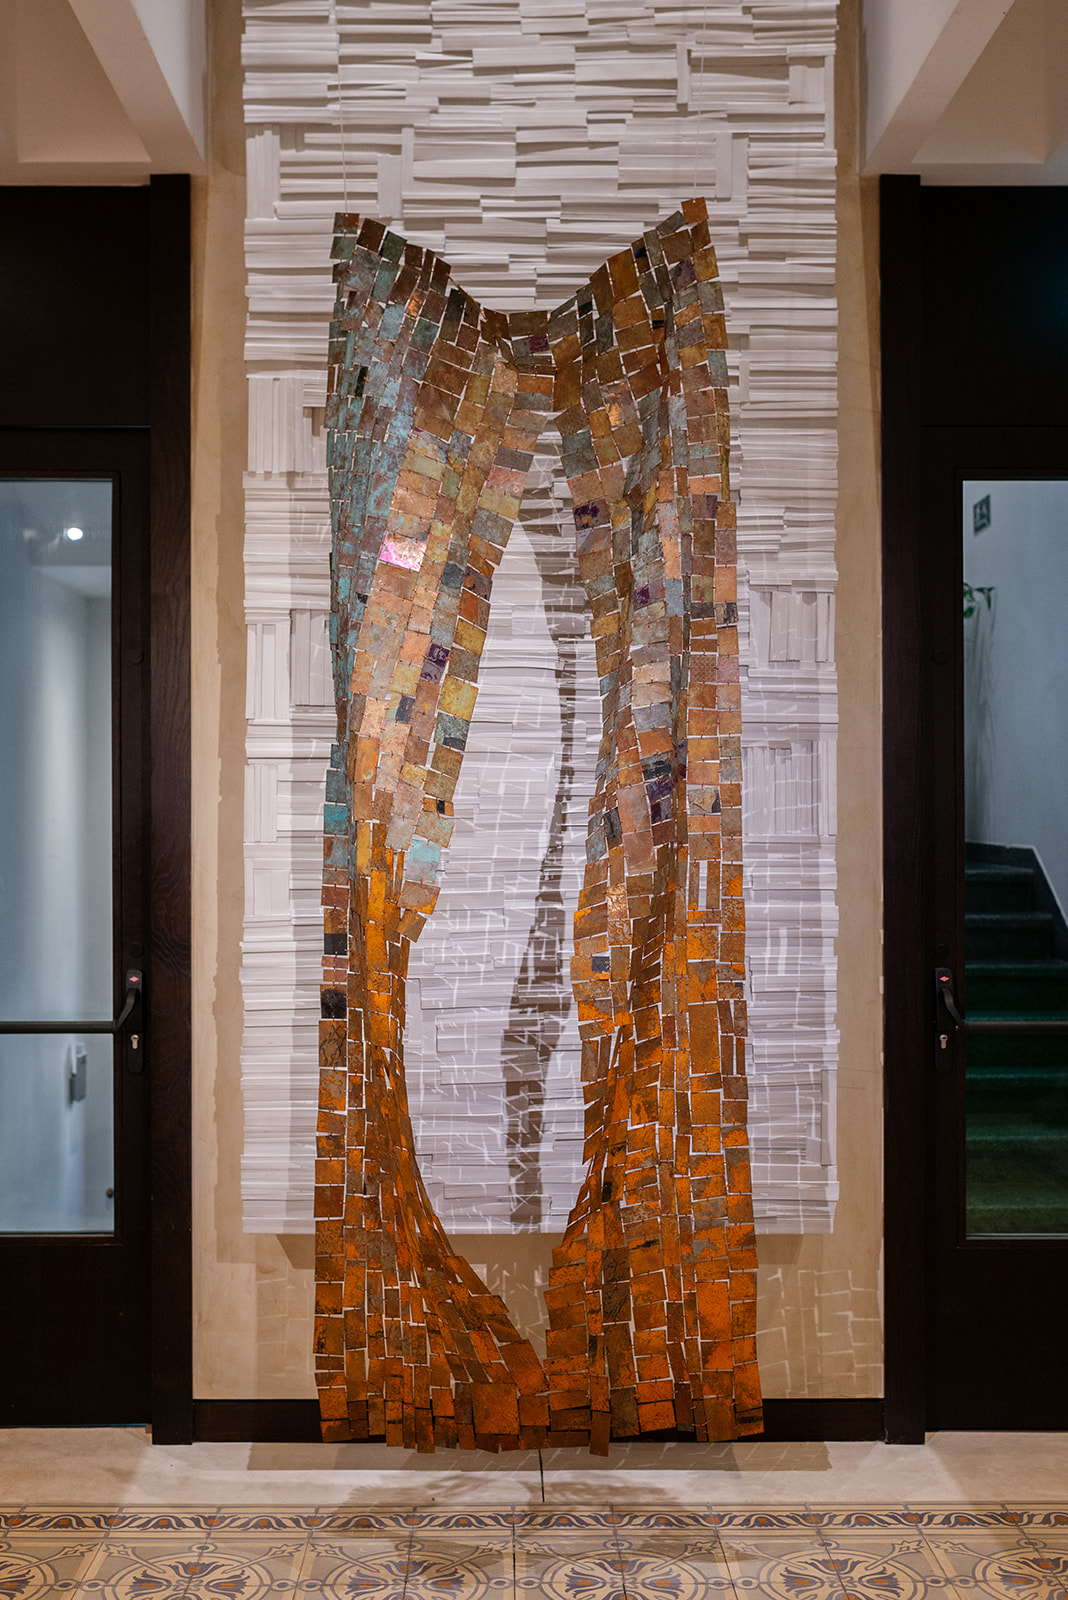 Tamar Dgani, Untitled, 2022, carpet made of scrap metal, metal cutting, corrosion formation, copper wire tied by hand, 100X250 cm<br />
Photography: Neta Cones